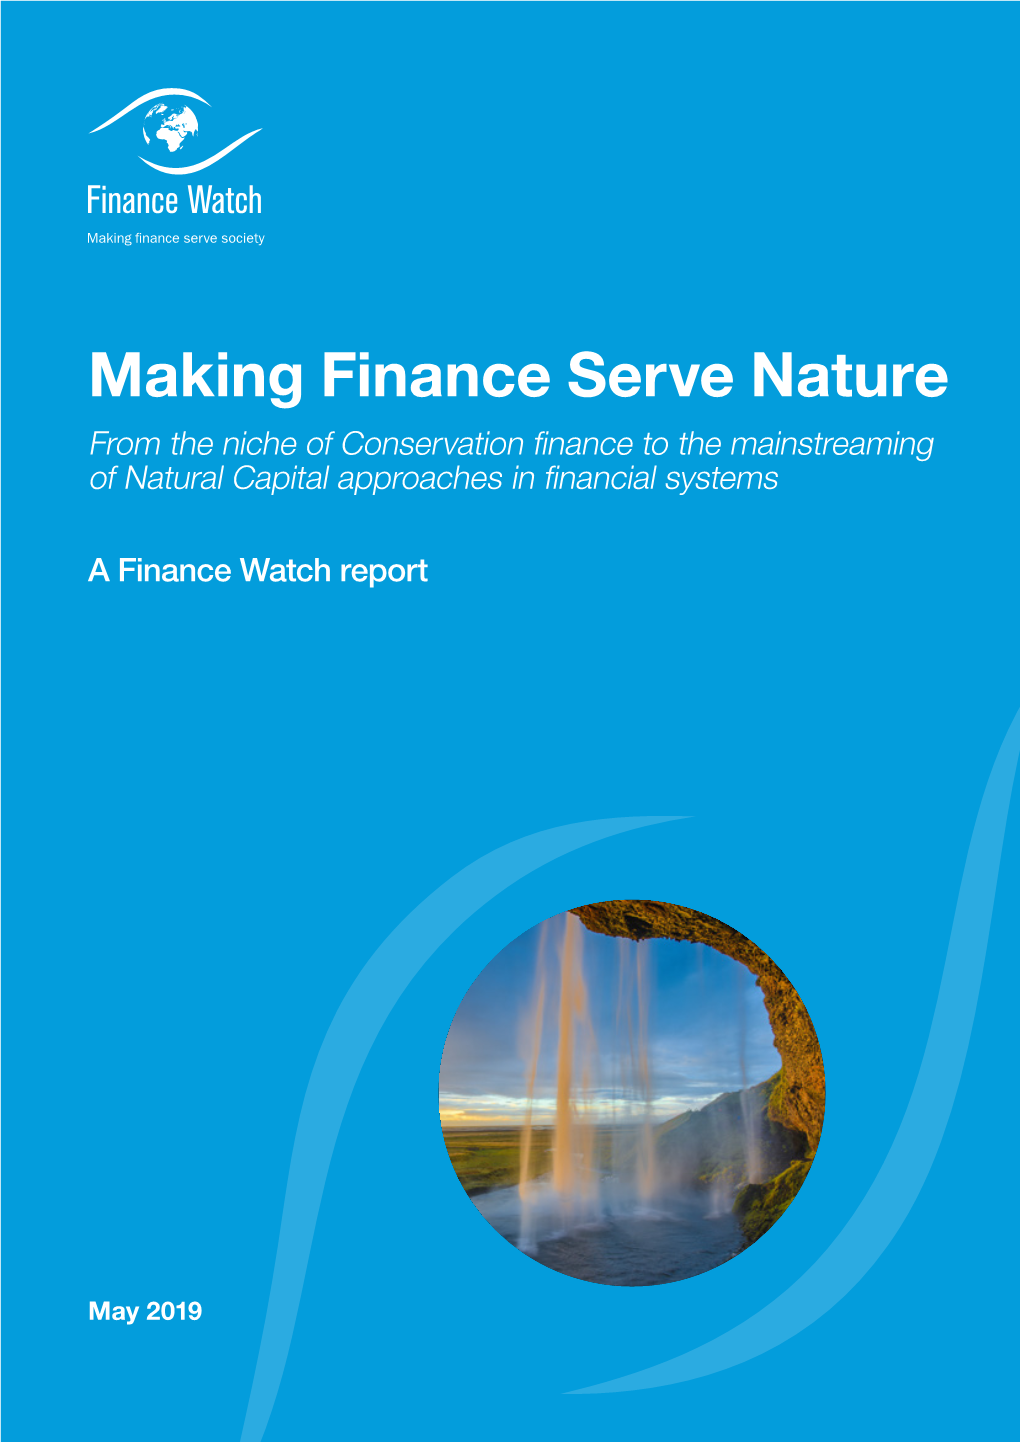 Making Finance Serve Nature from the Niche of Conservation Finance to the Mainstreaming of Natural Capital Approaches in Financial Systems